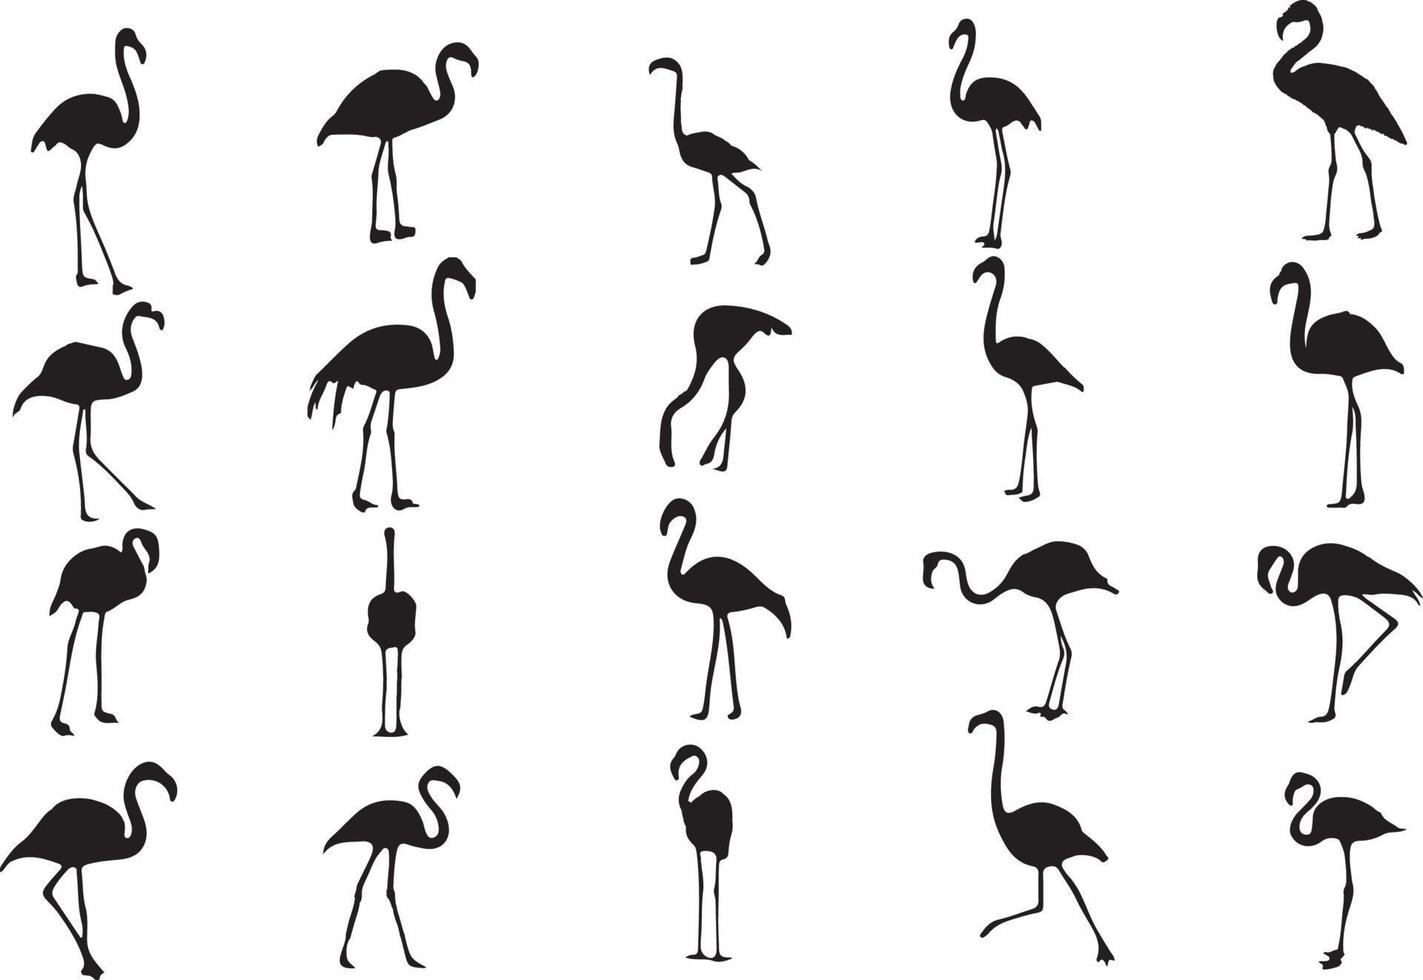 The set of Egret Bird Silhouette collection vector